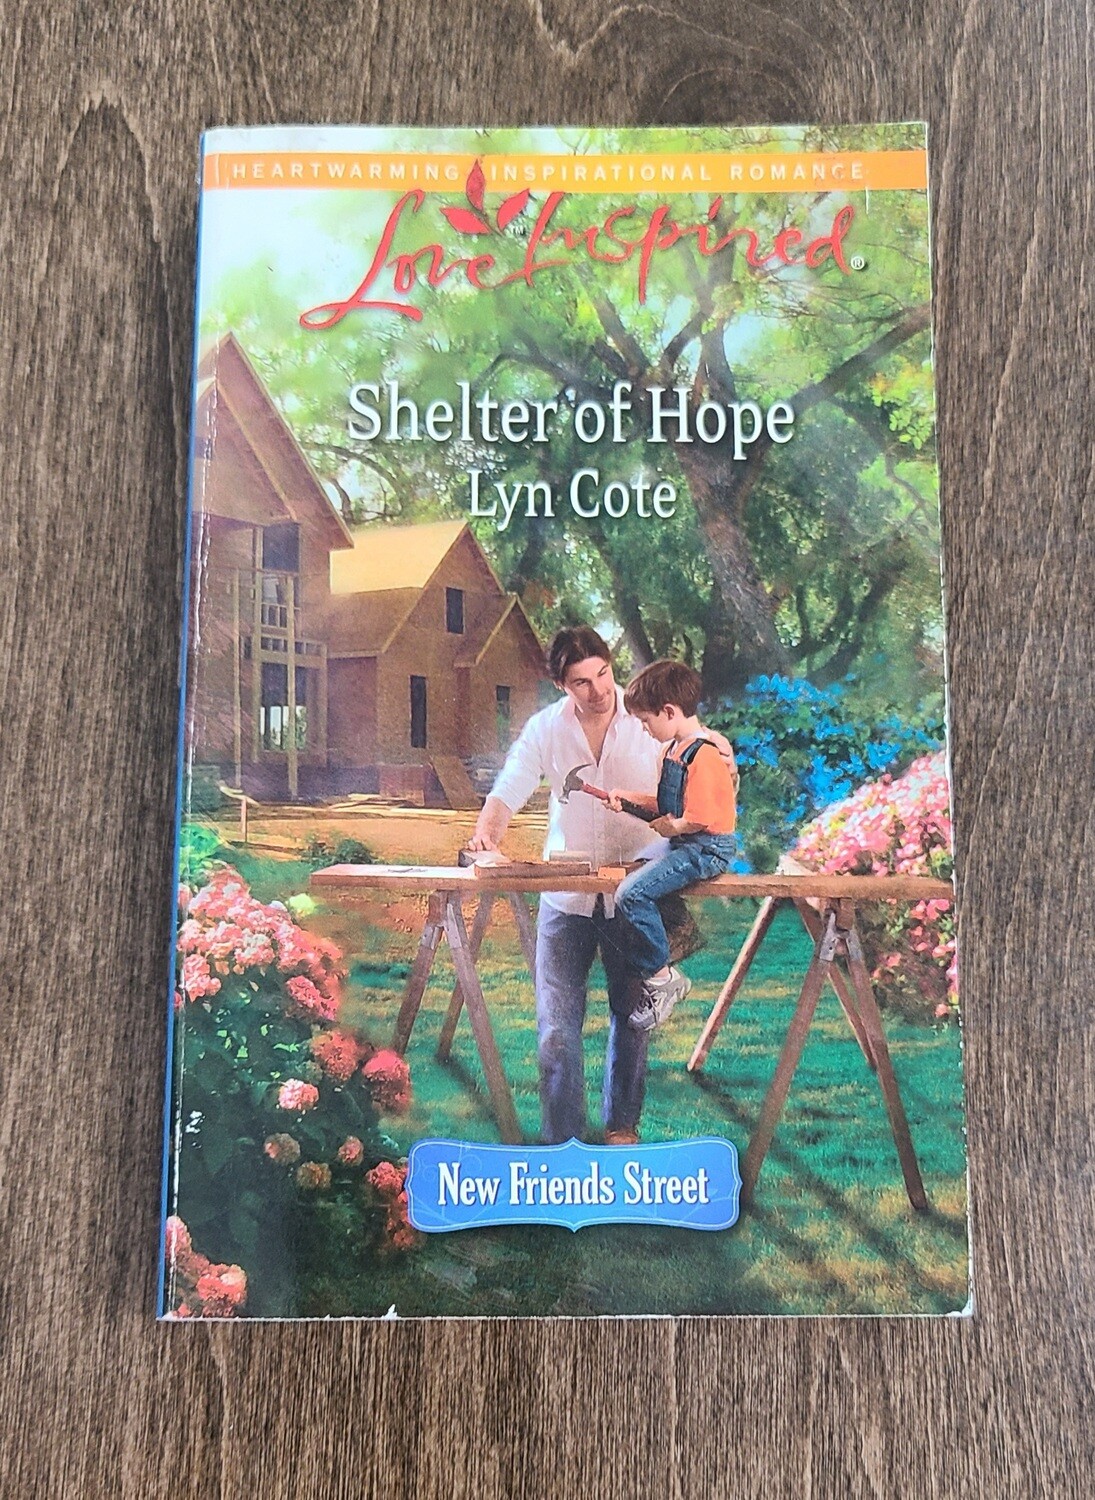 Shelter of Hope by Lyn Cote